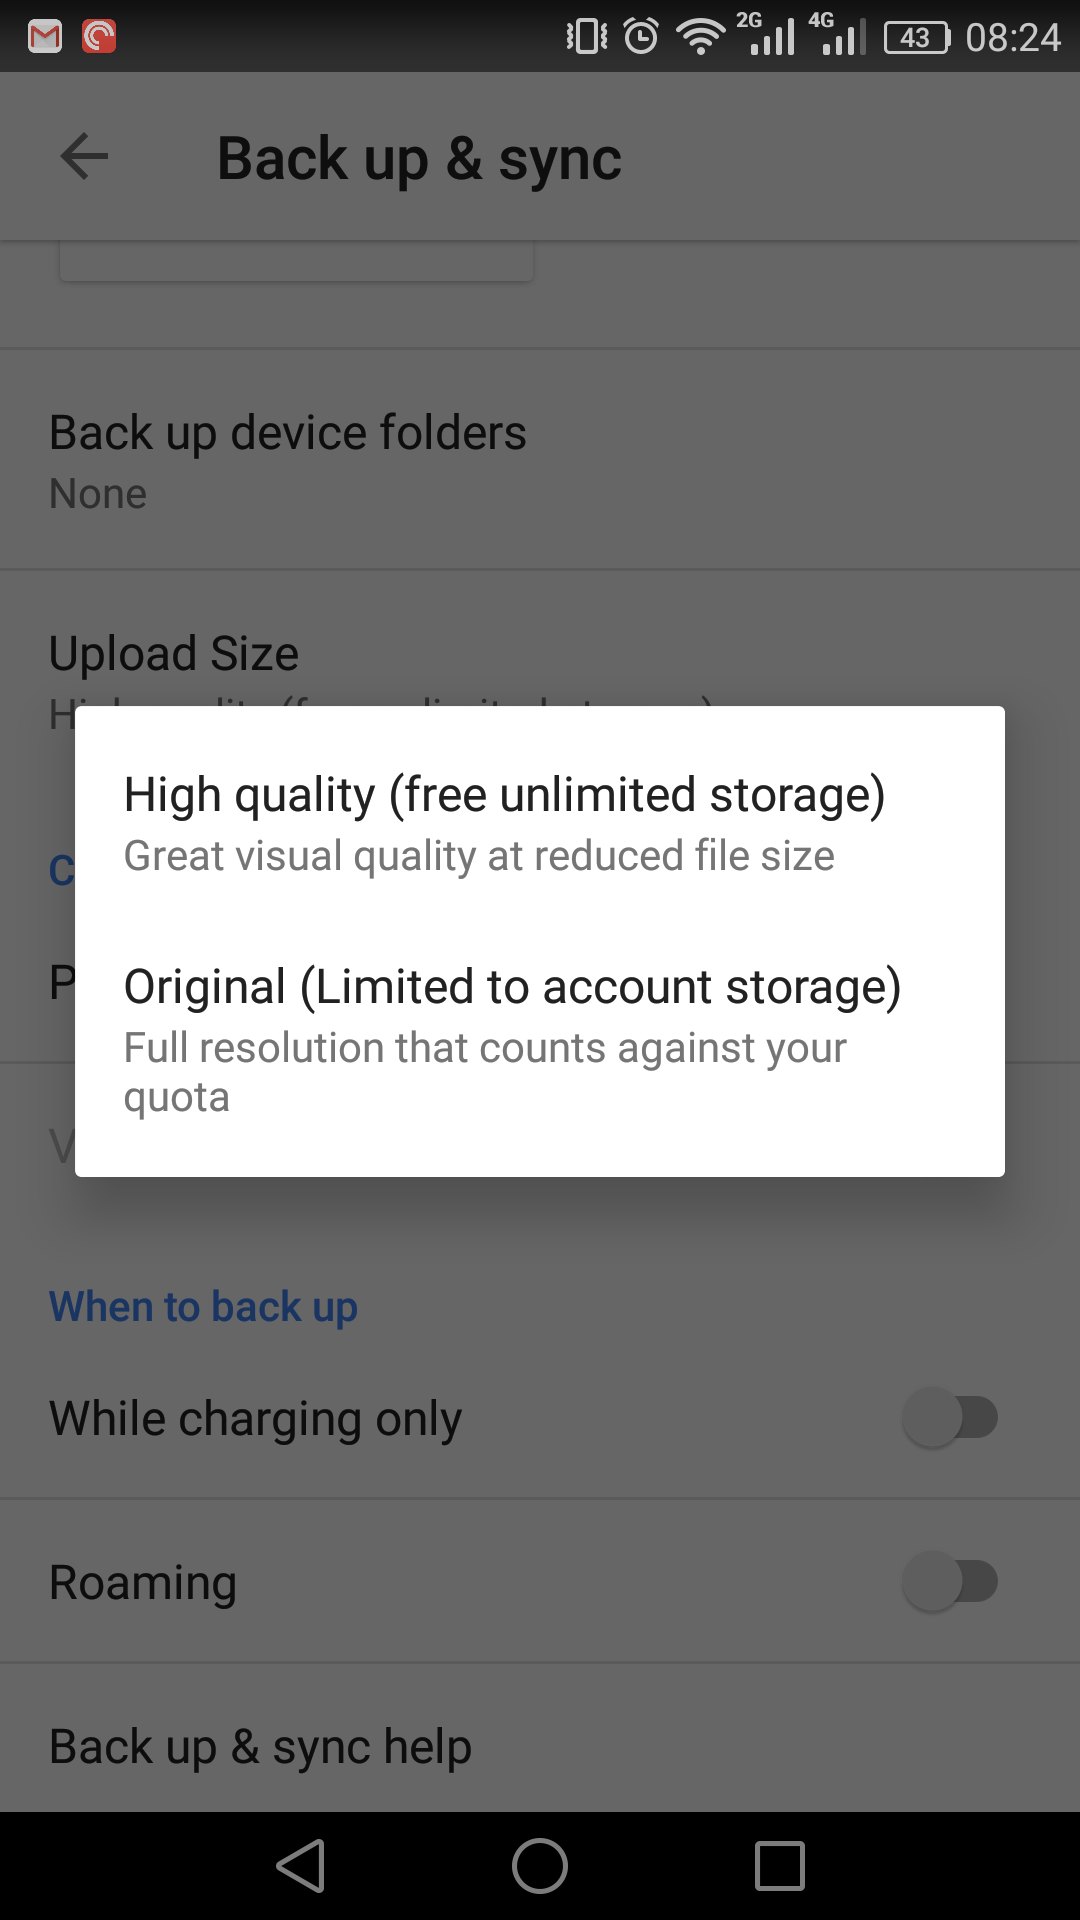 Google Photos' unlimited free storage is gone. Here's how to get